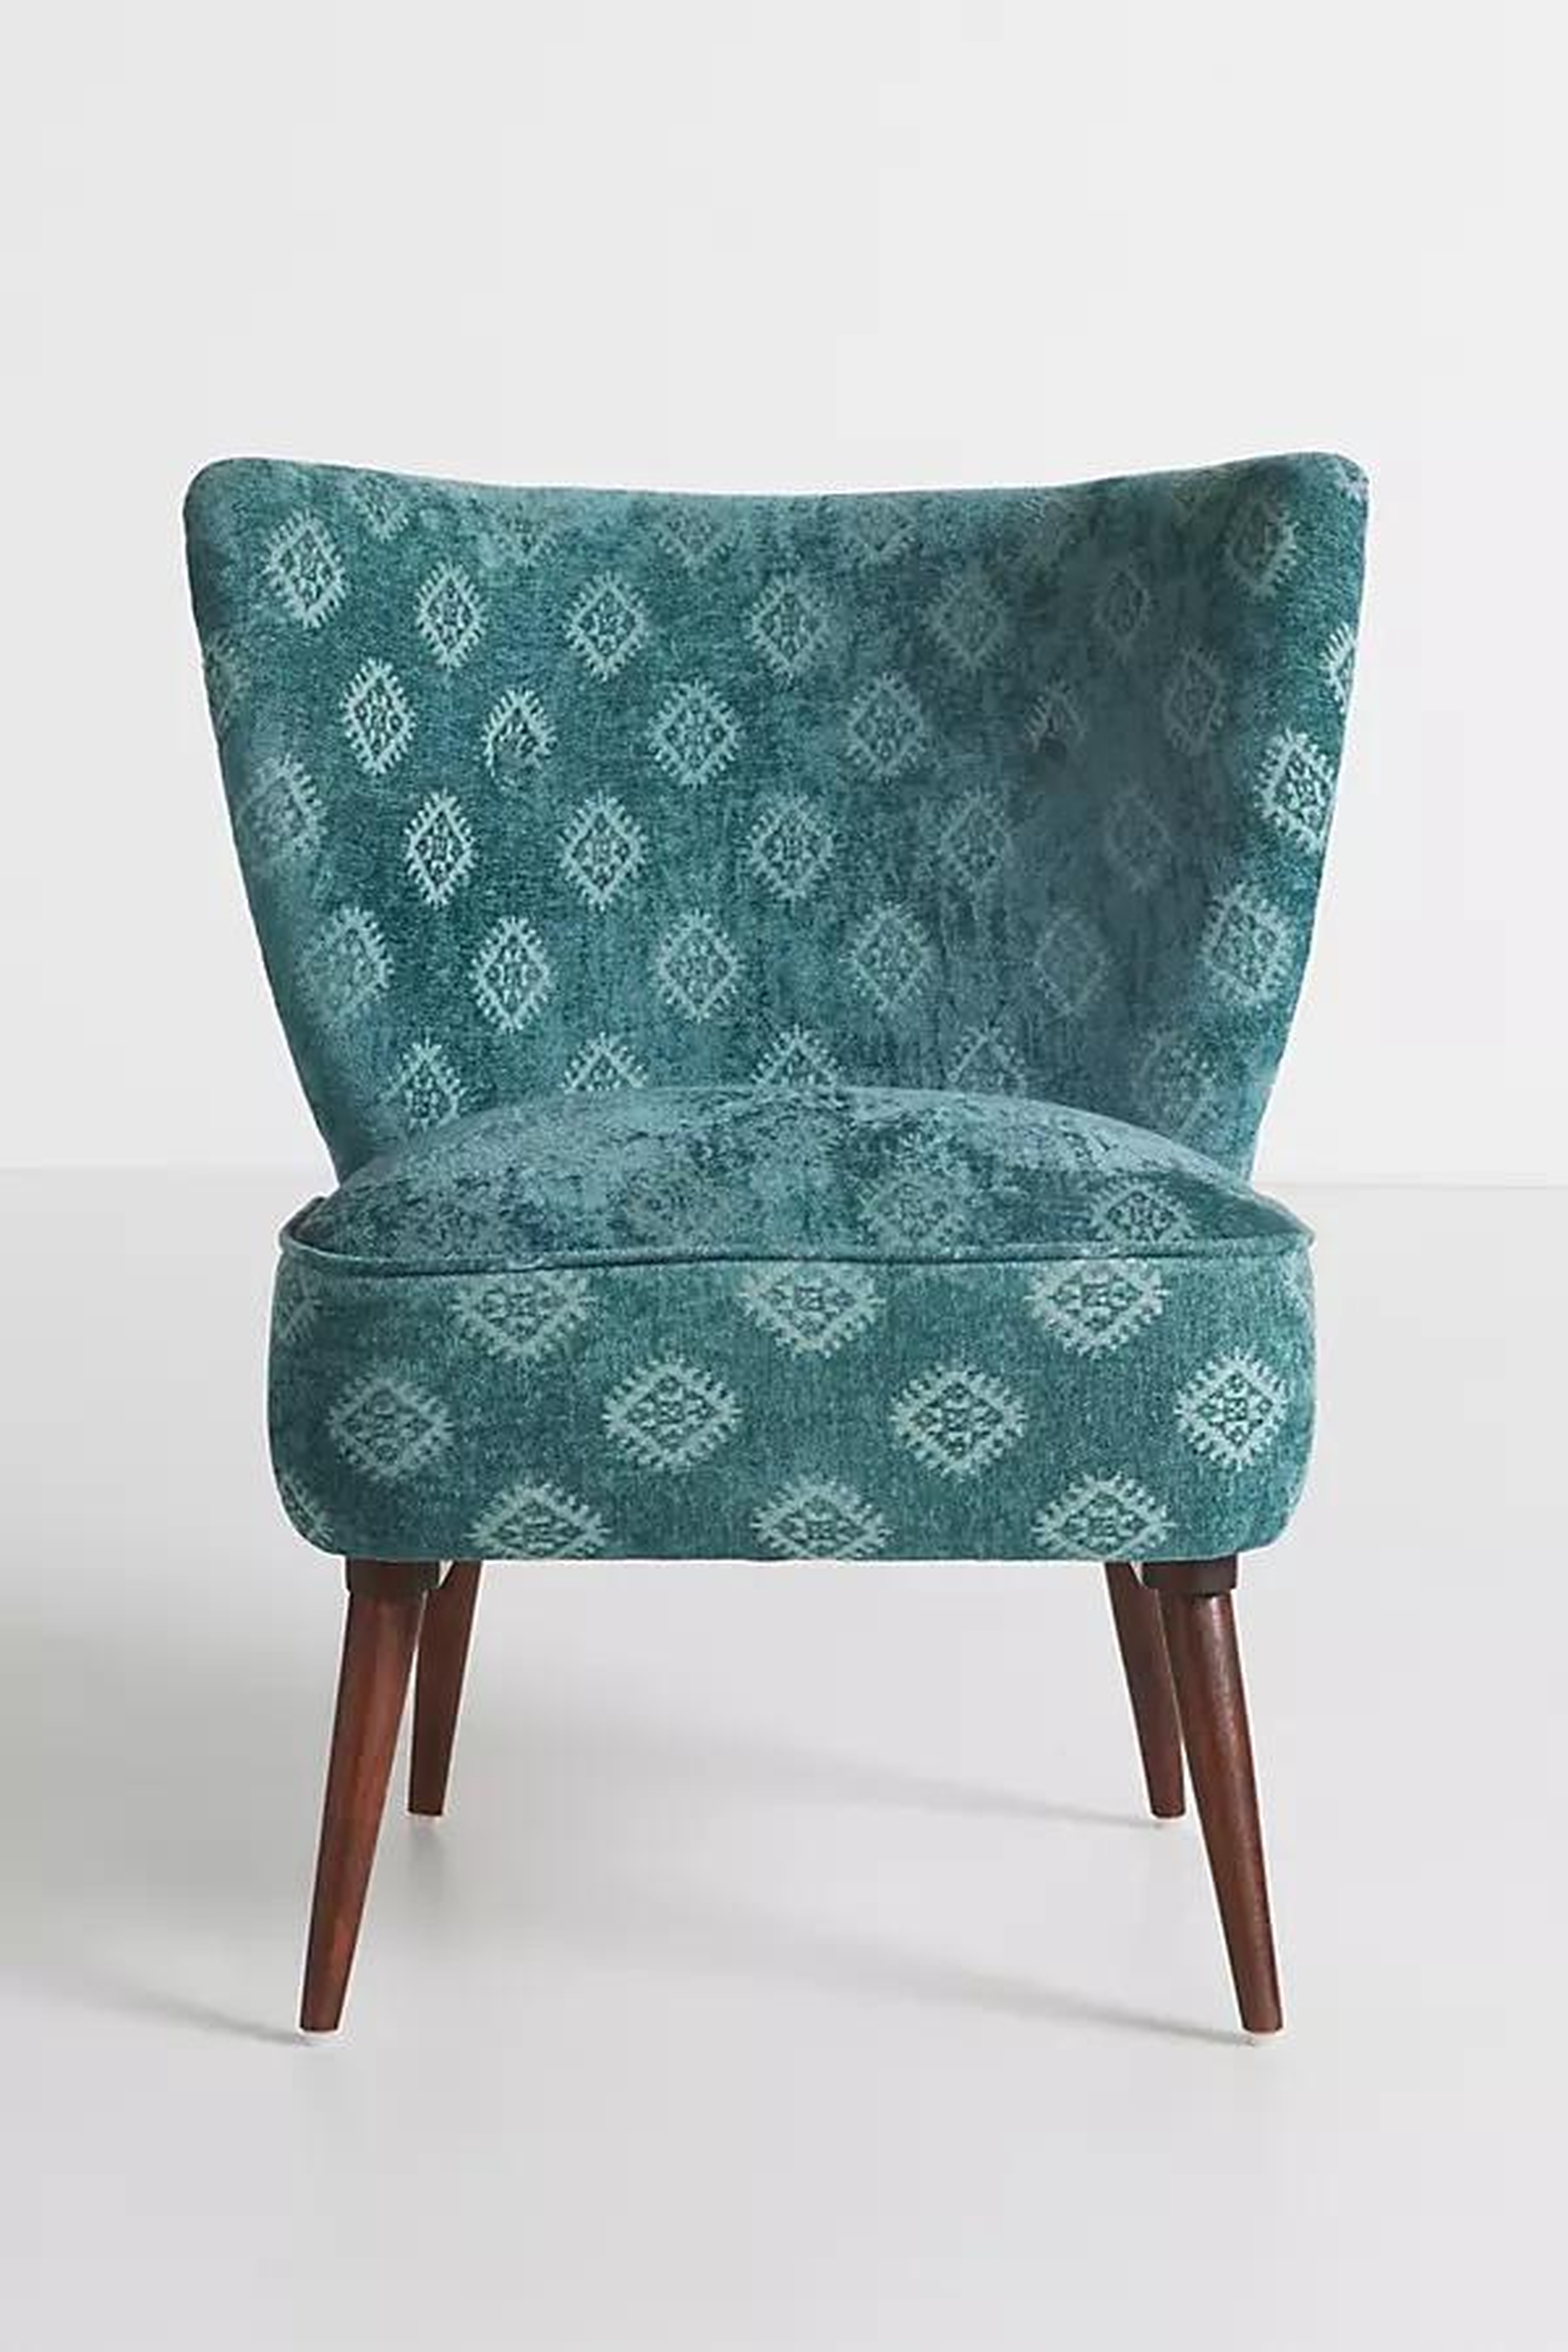 Velvet Rug-Upholstered Petite Accent Chair By Anthropologie in Green - Anthropologie